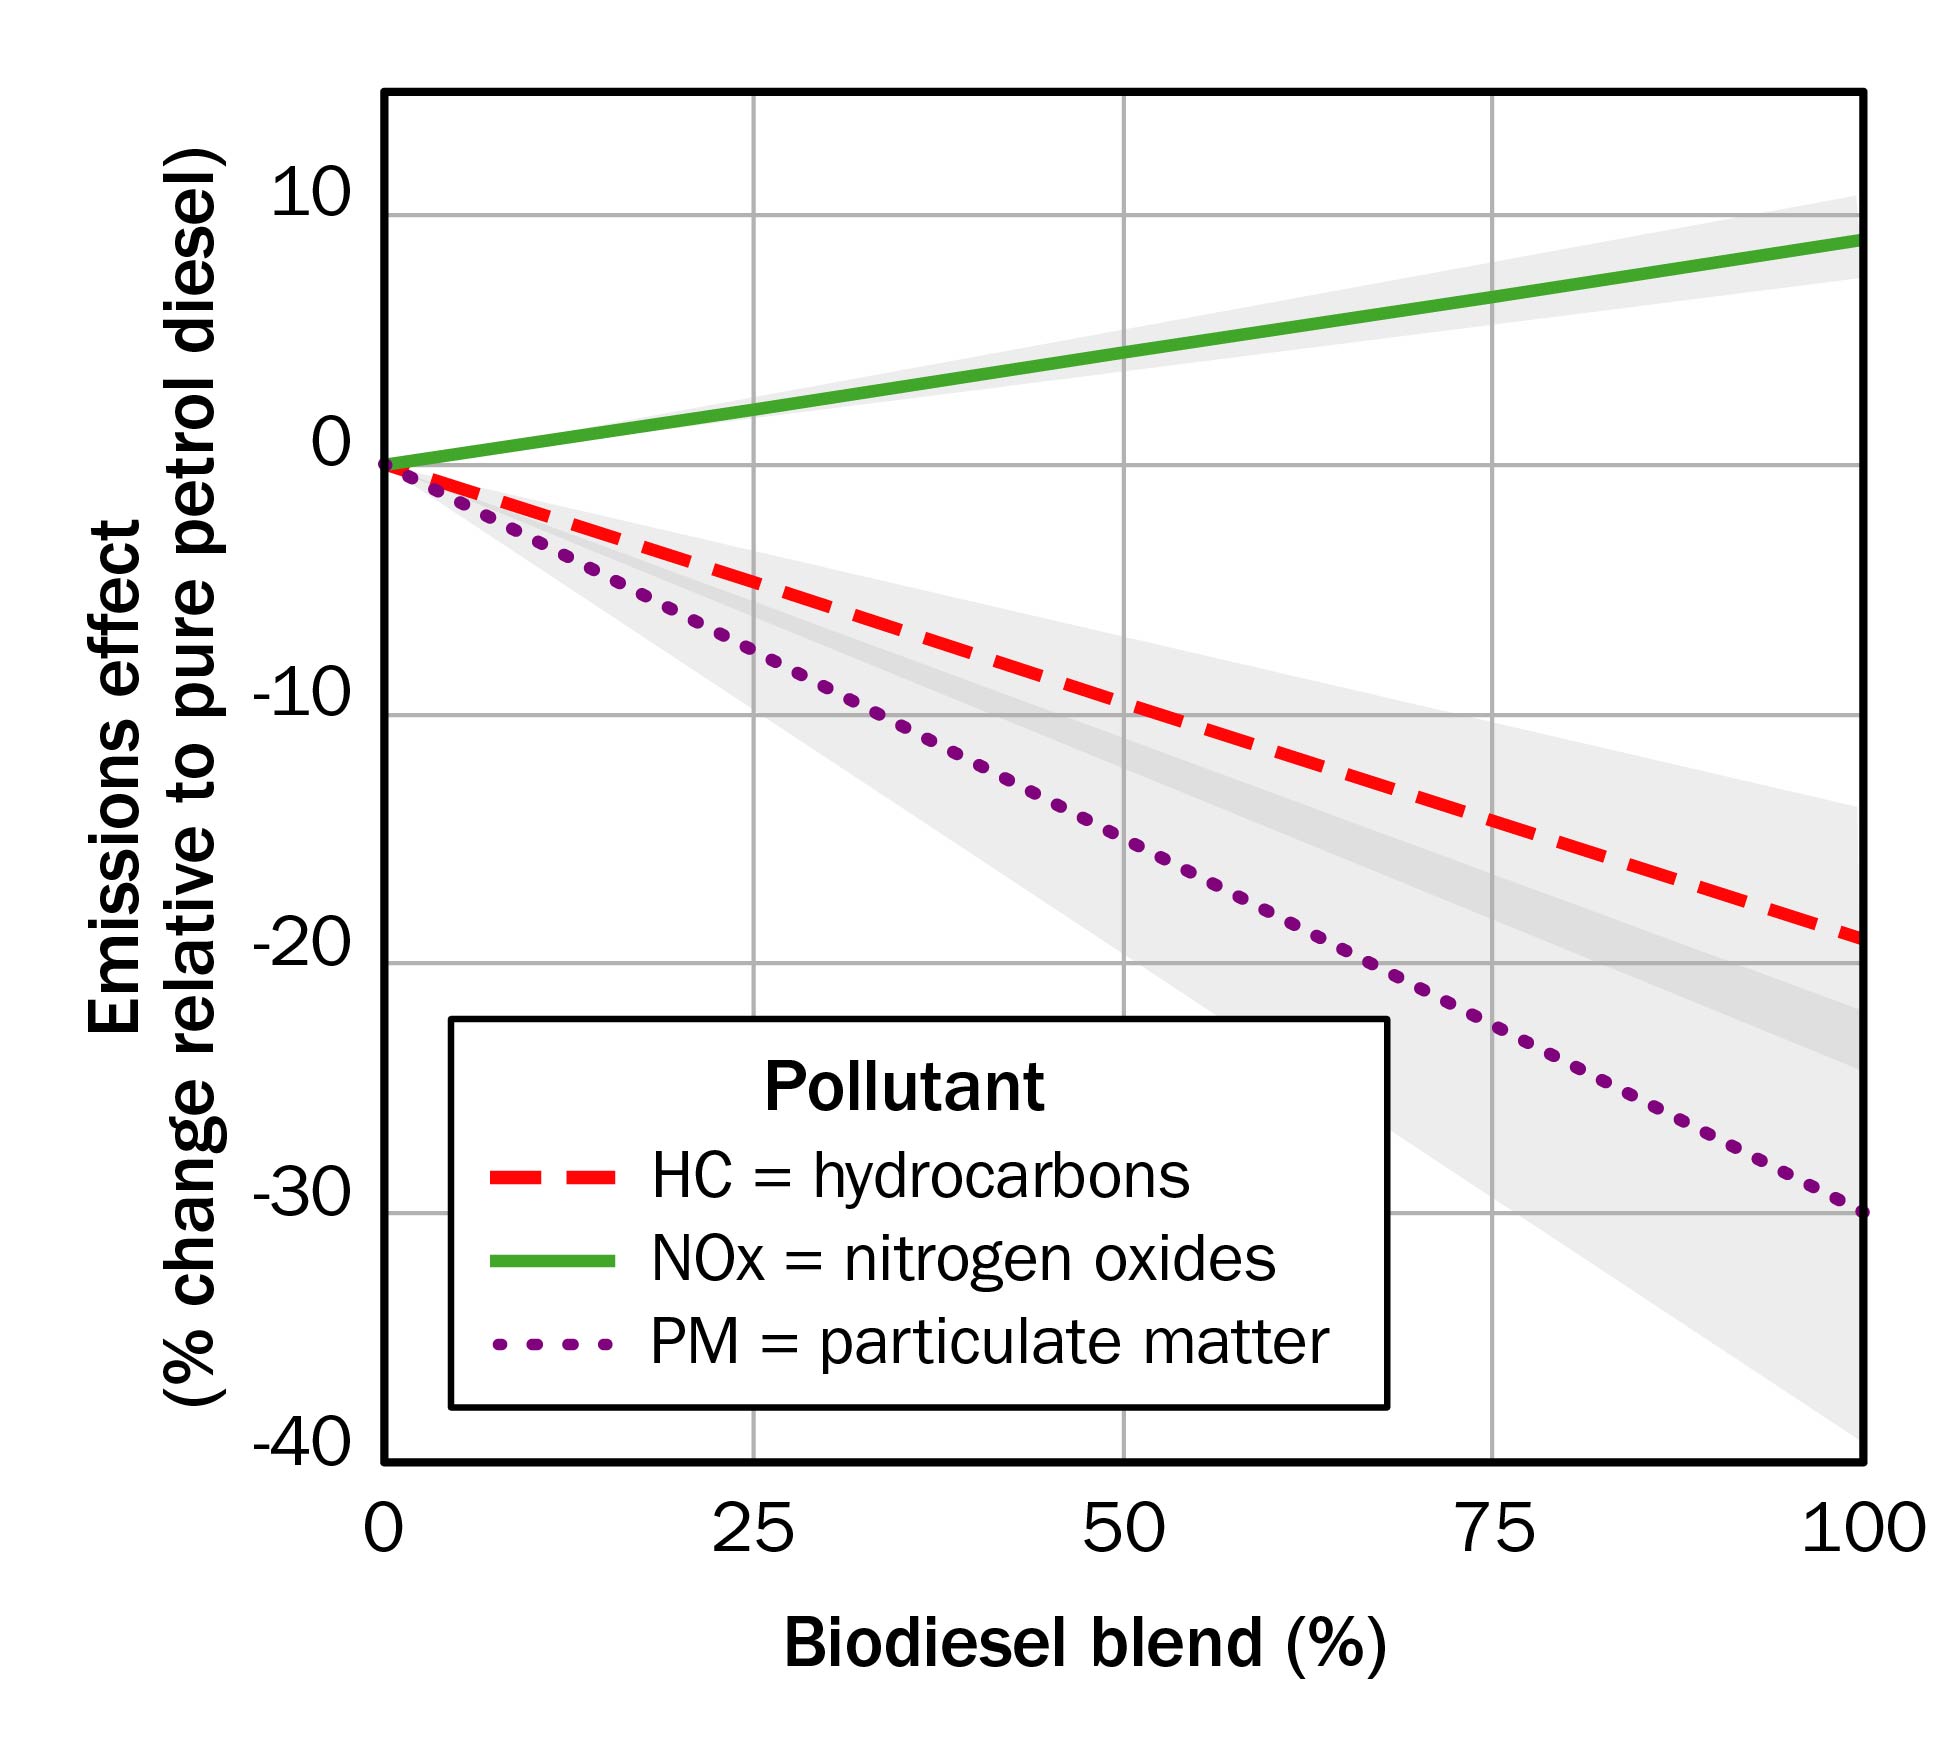 A graph showing the linear effect of increasing the percentage of biodiesel in a diesel blend on emissions of nitrogen oxides (NOx), hydrocarbons (HC) and particulate matter (PM) from a diesel engine. HC and PM emissions decline while NOx emissions increase slightly with increasing biodiesel blends.